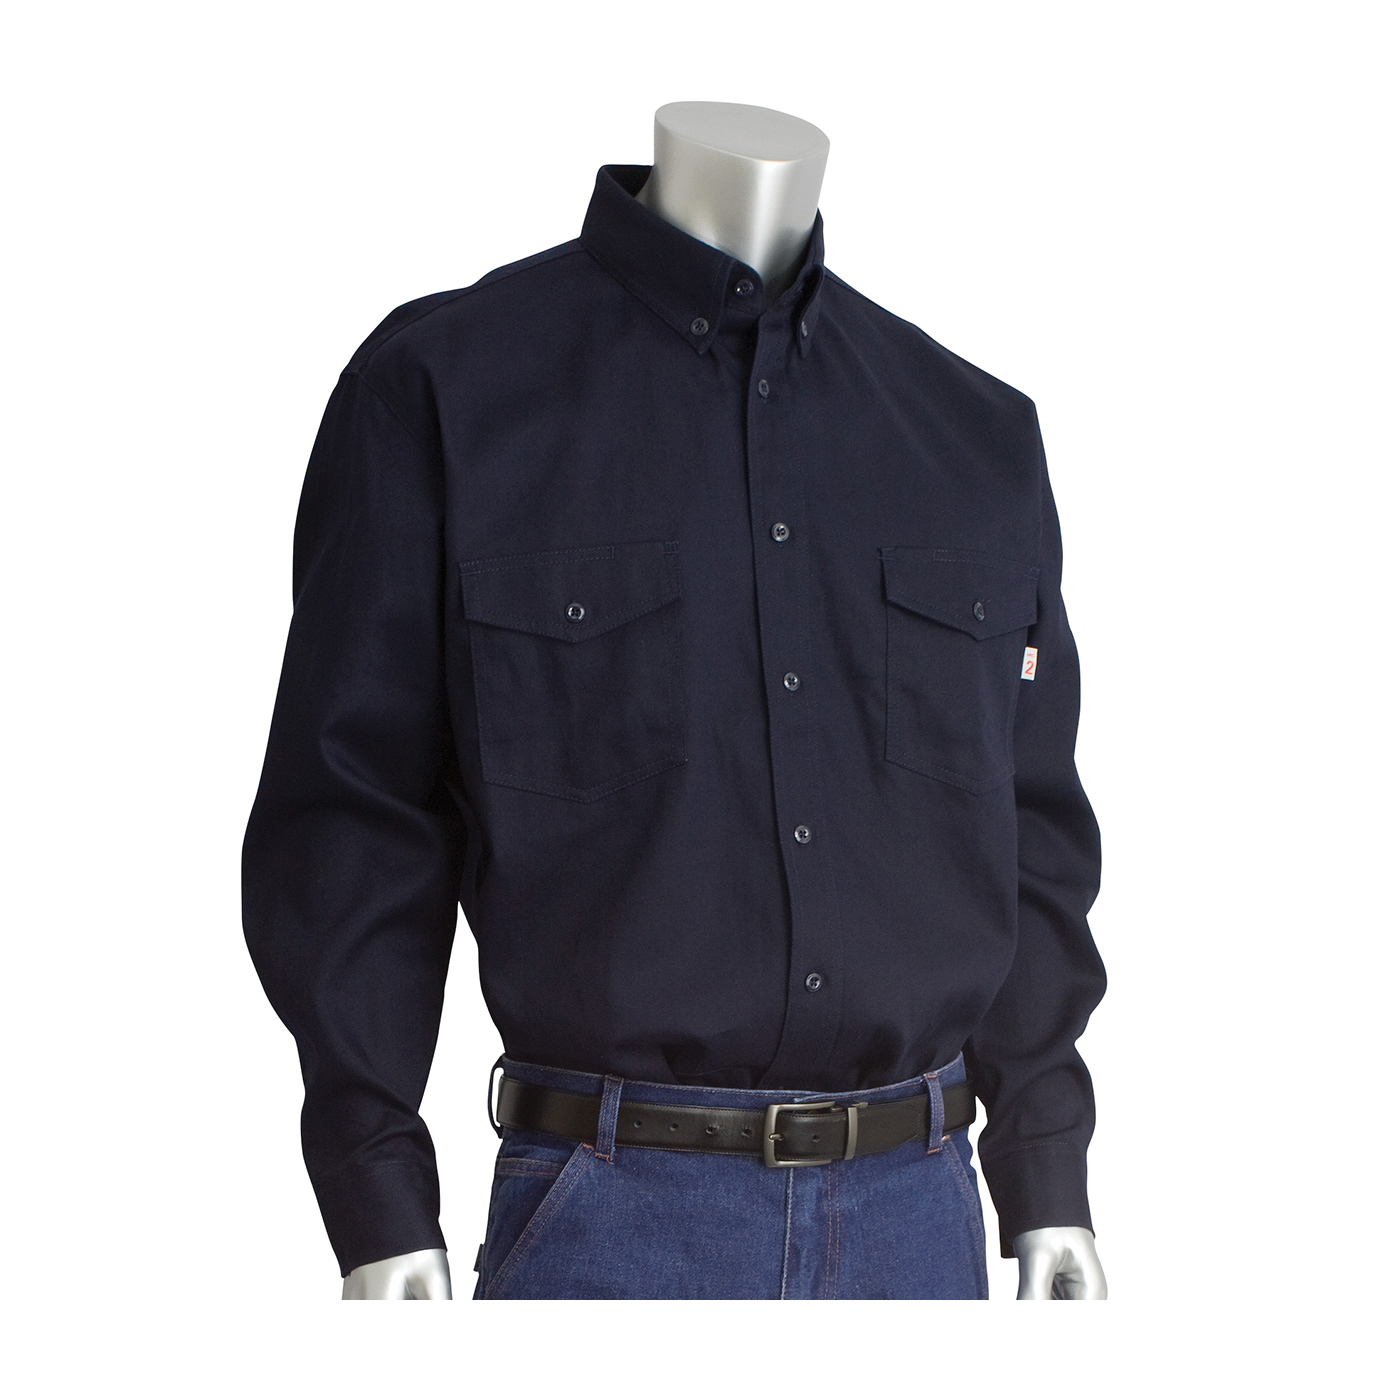 PIP® 385-FRWS-NV/M Arc and Flame-Resistant Long Sleeve Work Shirt, M, Navy Blue, 31-1/2 in L, 90% Cotton/10% Nylon